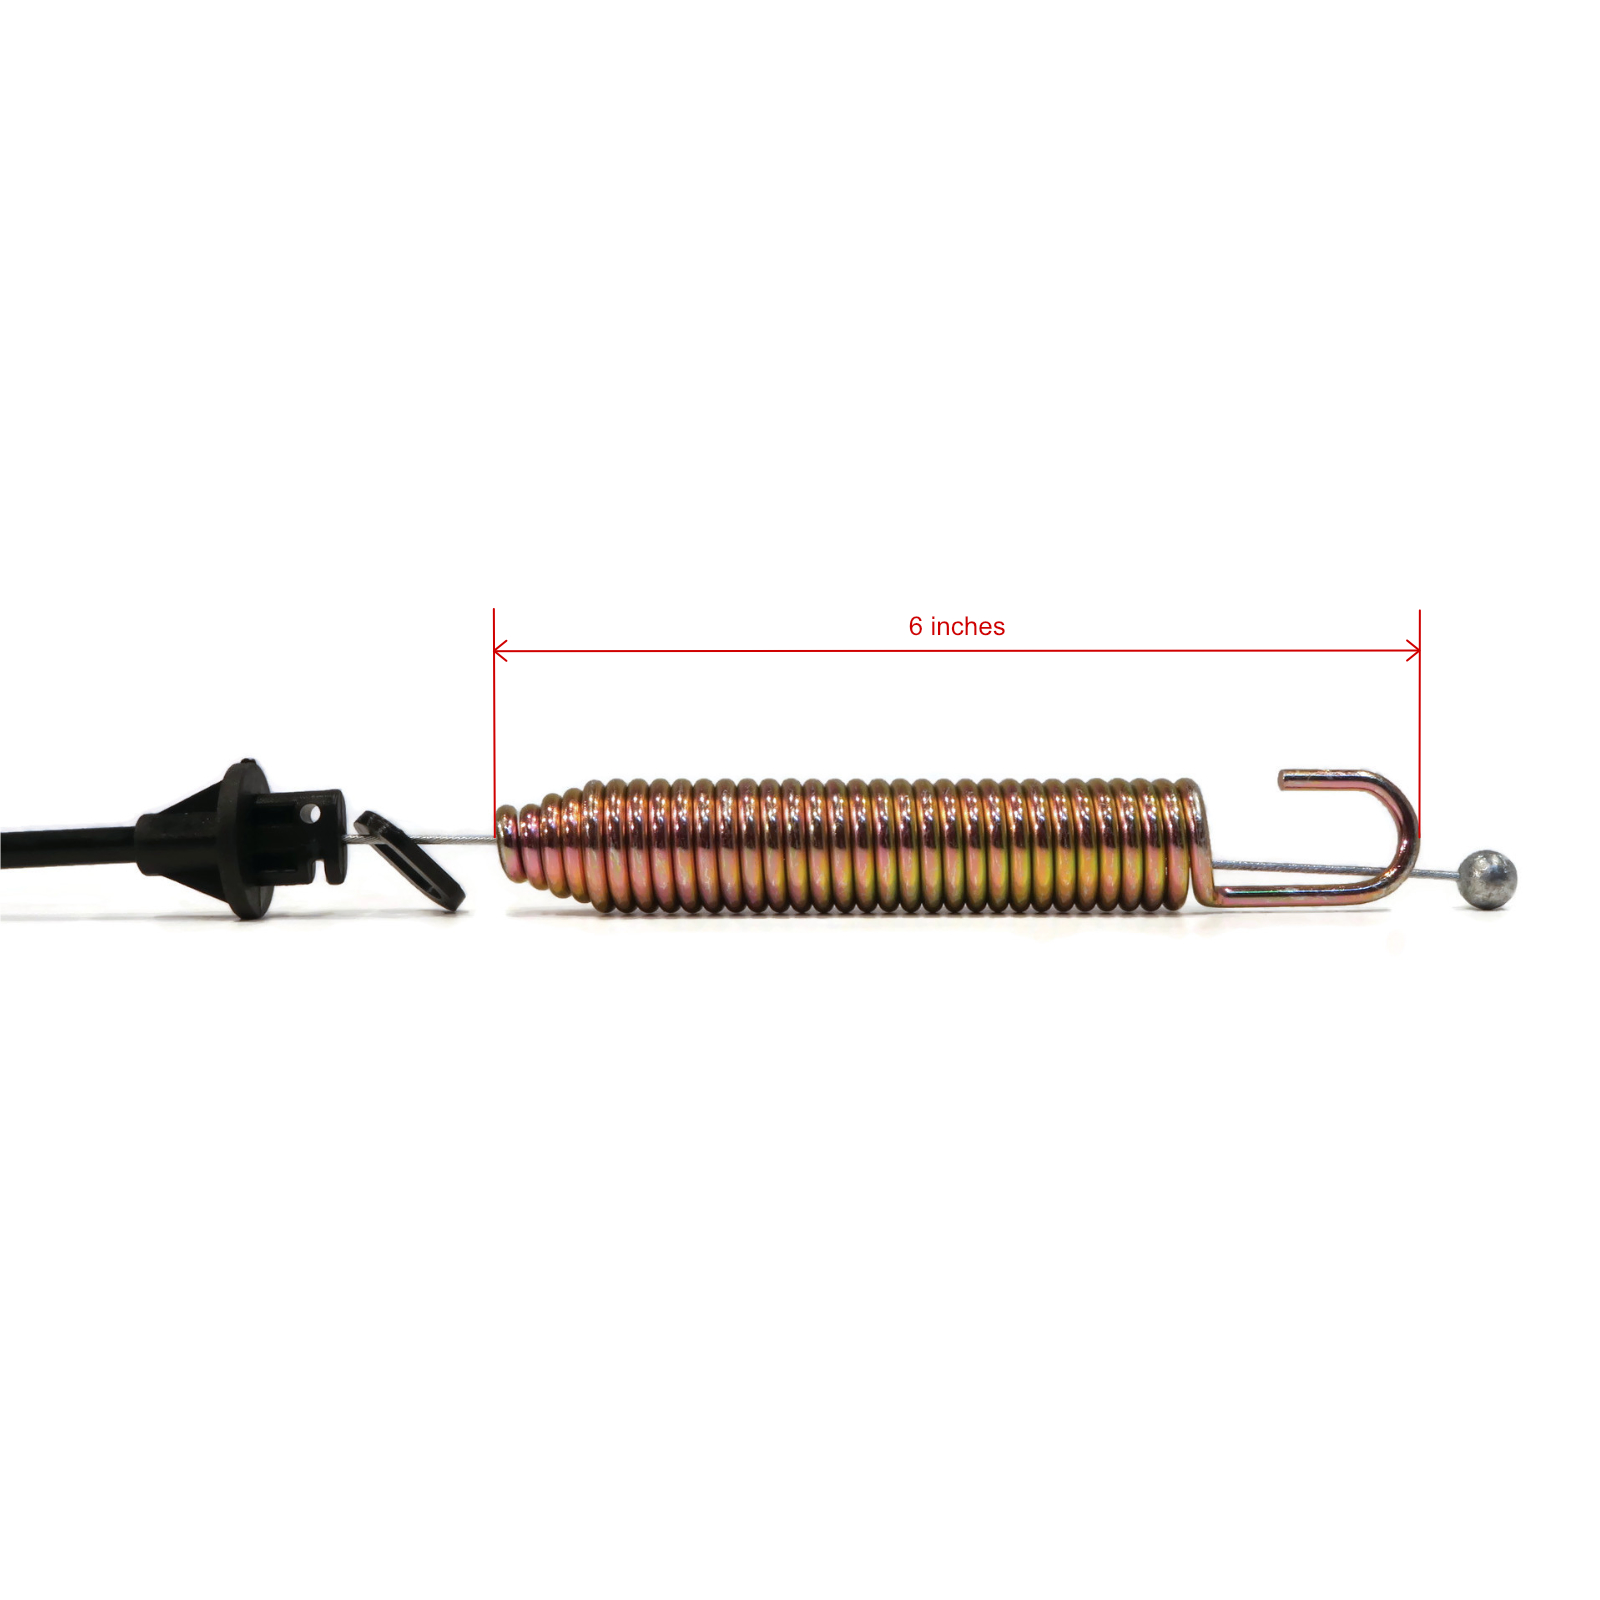 The ROP Shop | (2) Deck Engagement Clutch Cables for MTD LT942G LT942H 600 Series Lawn Tractors - image 4 of 9